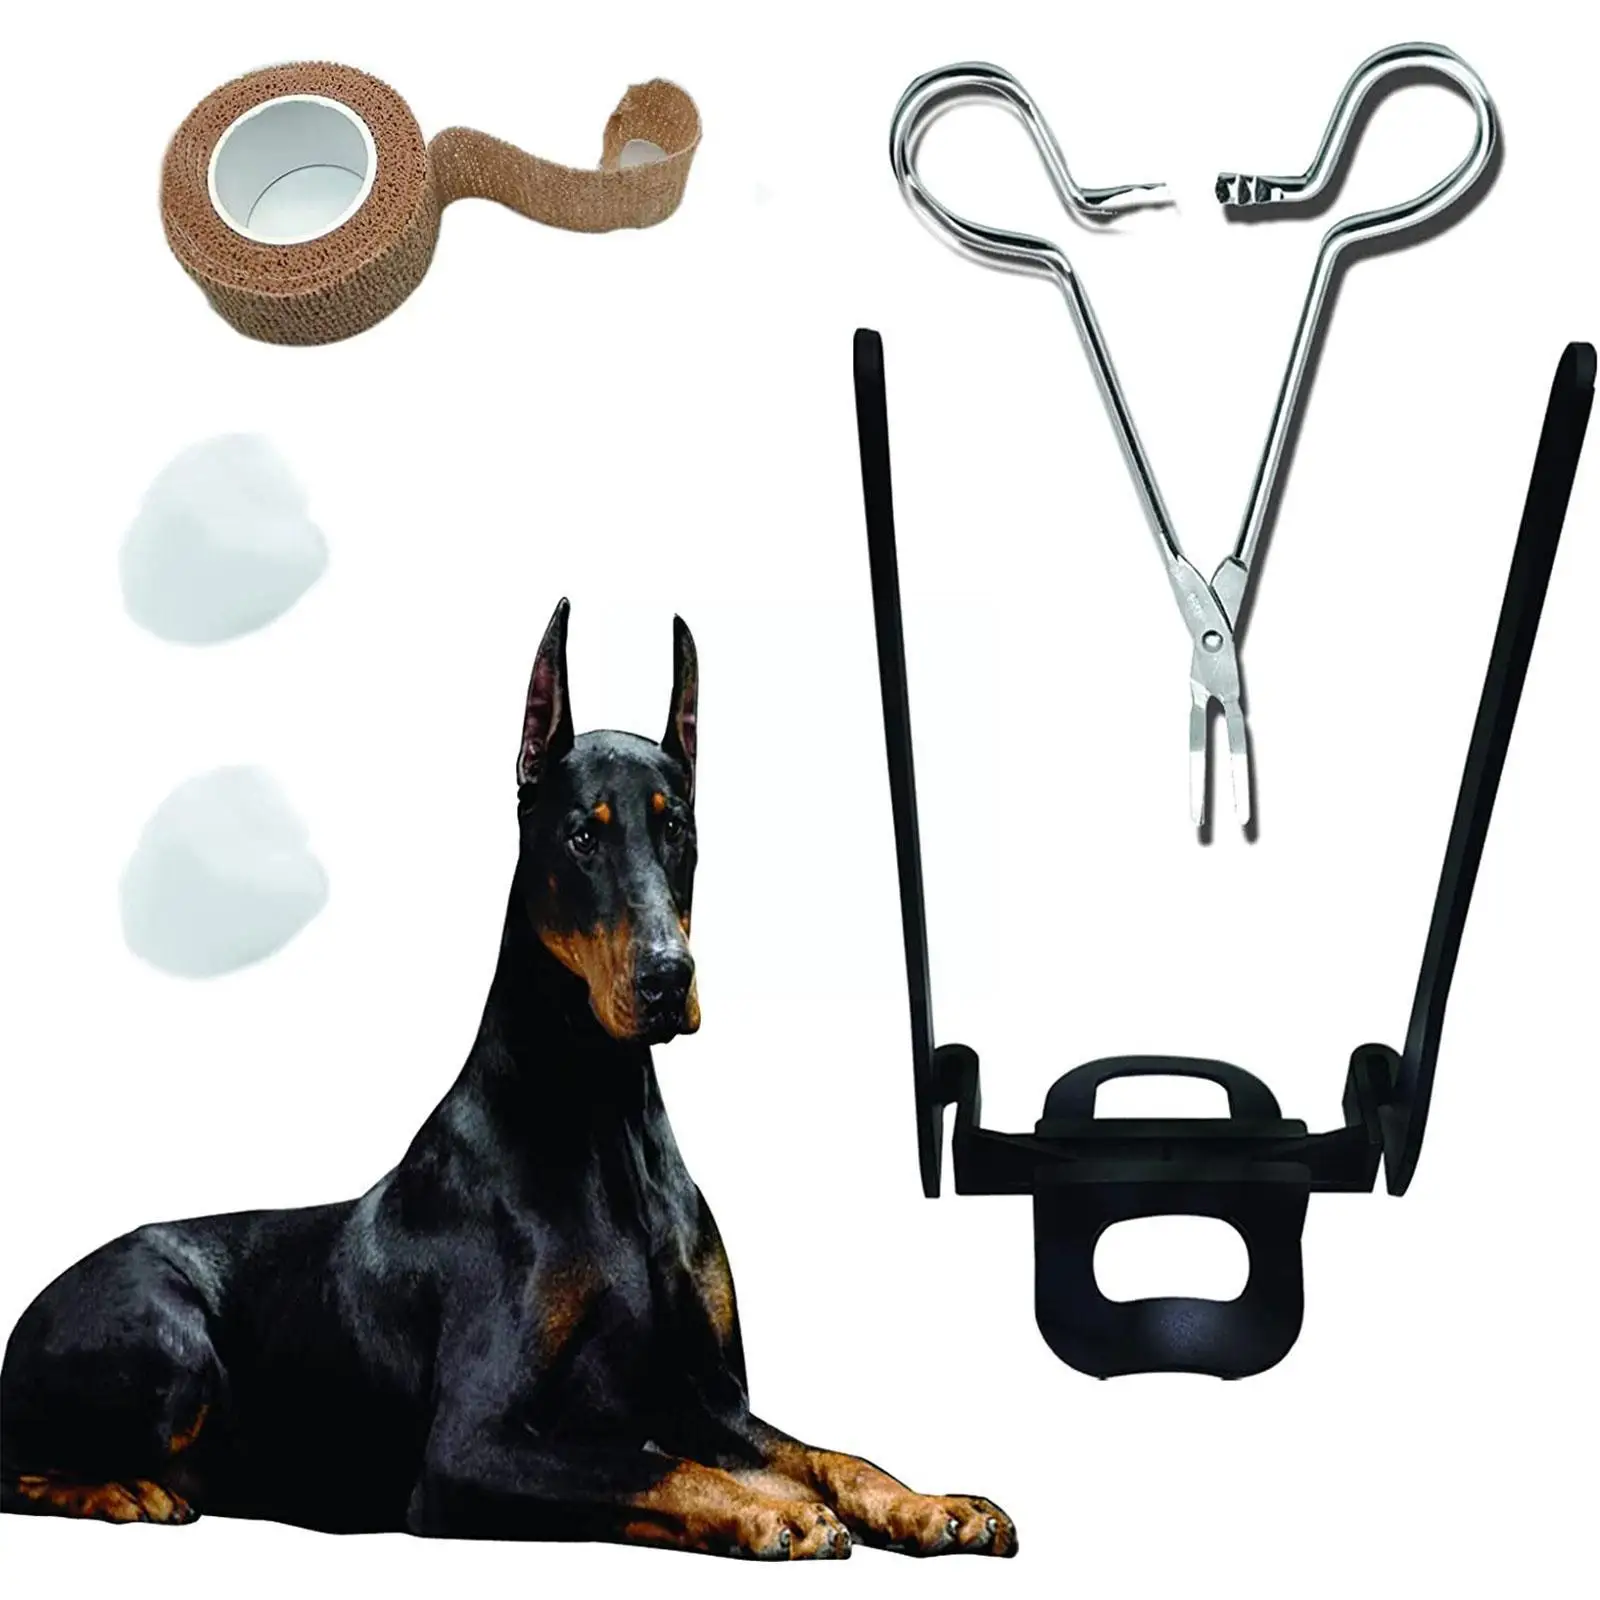 Dandelion Dog Ear Posting Kit With Forceps Locking Tweezers Clamp-Ear Stand Up Support-Tape-Cotton For Doberman Pinscher Do S8E0